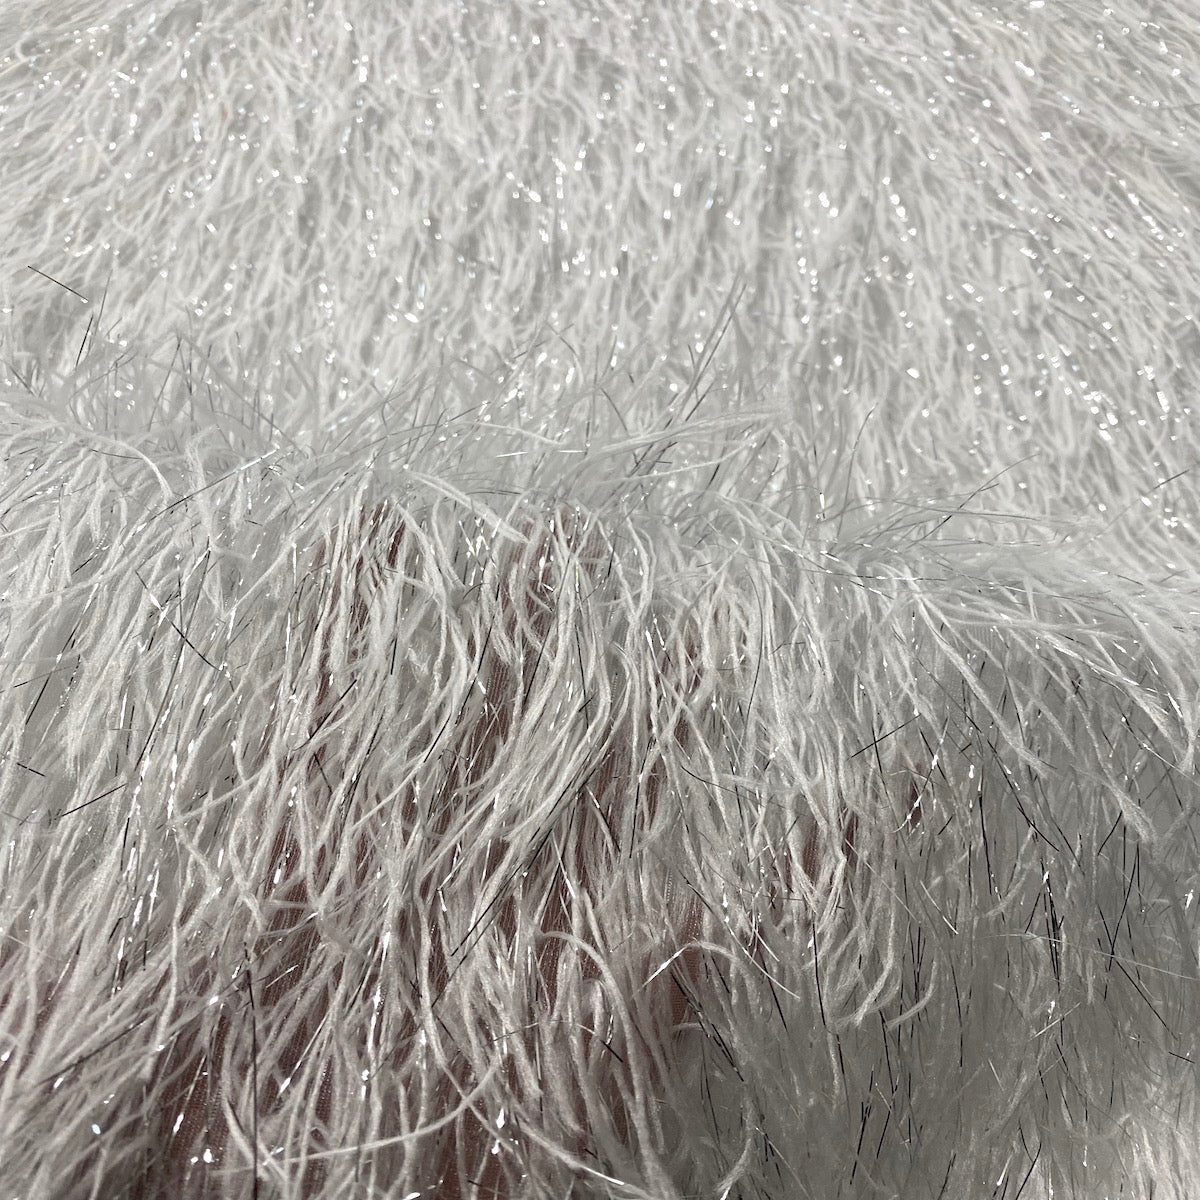 Ostrich Feather Trim: Fashion Feather Trimmings from Italy, SKU 00072866 at  $75 — Buy Luxury Fabrics Online